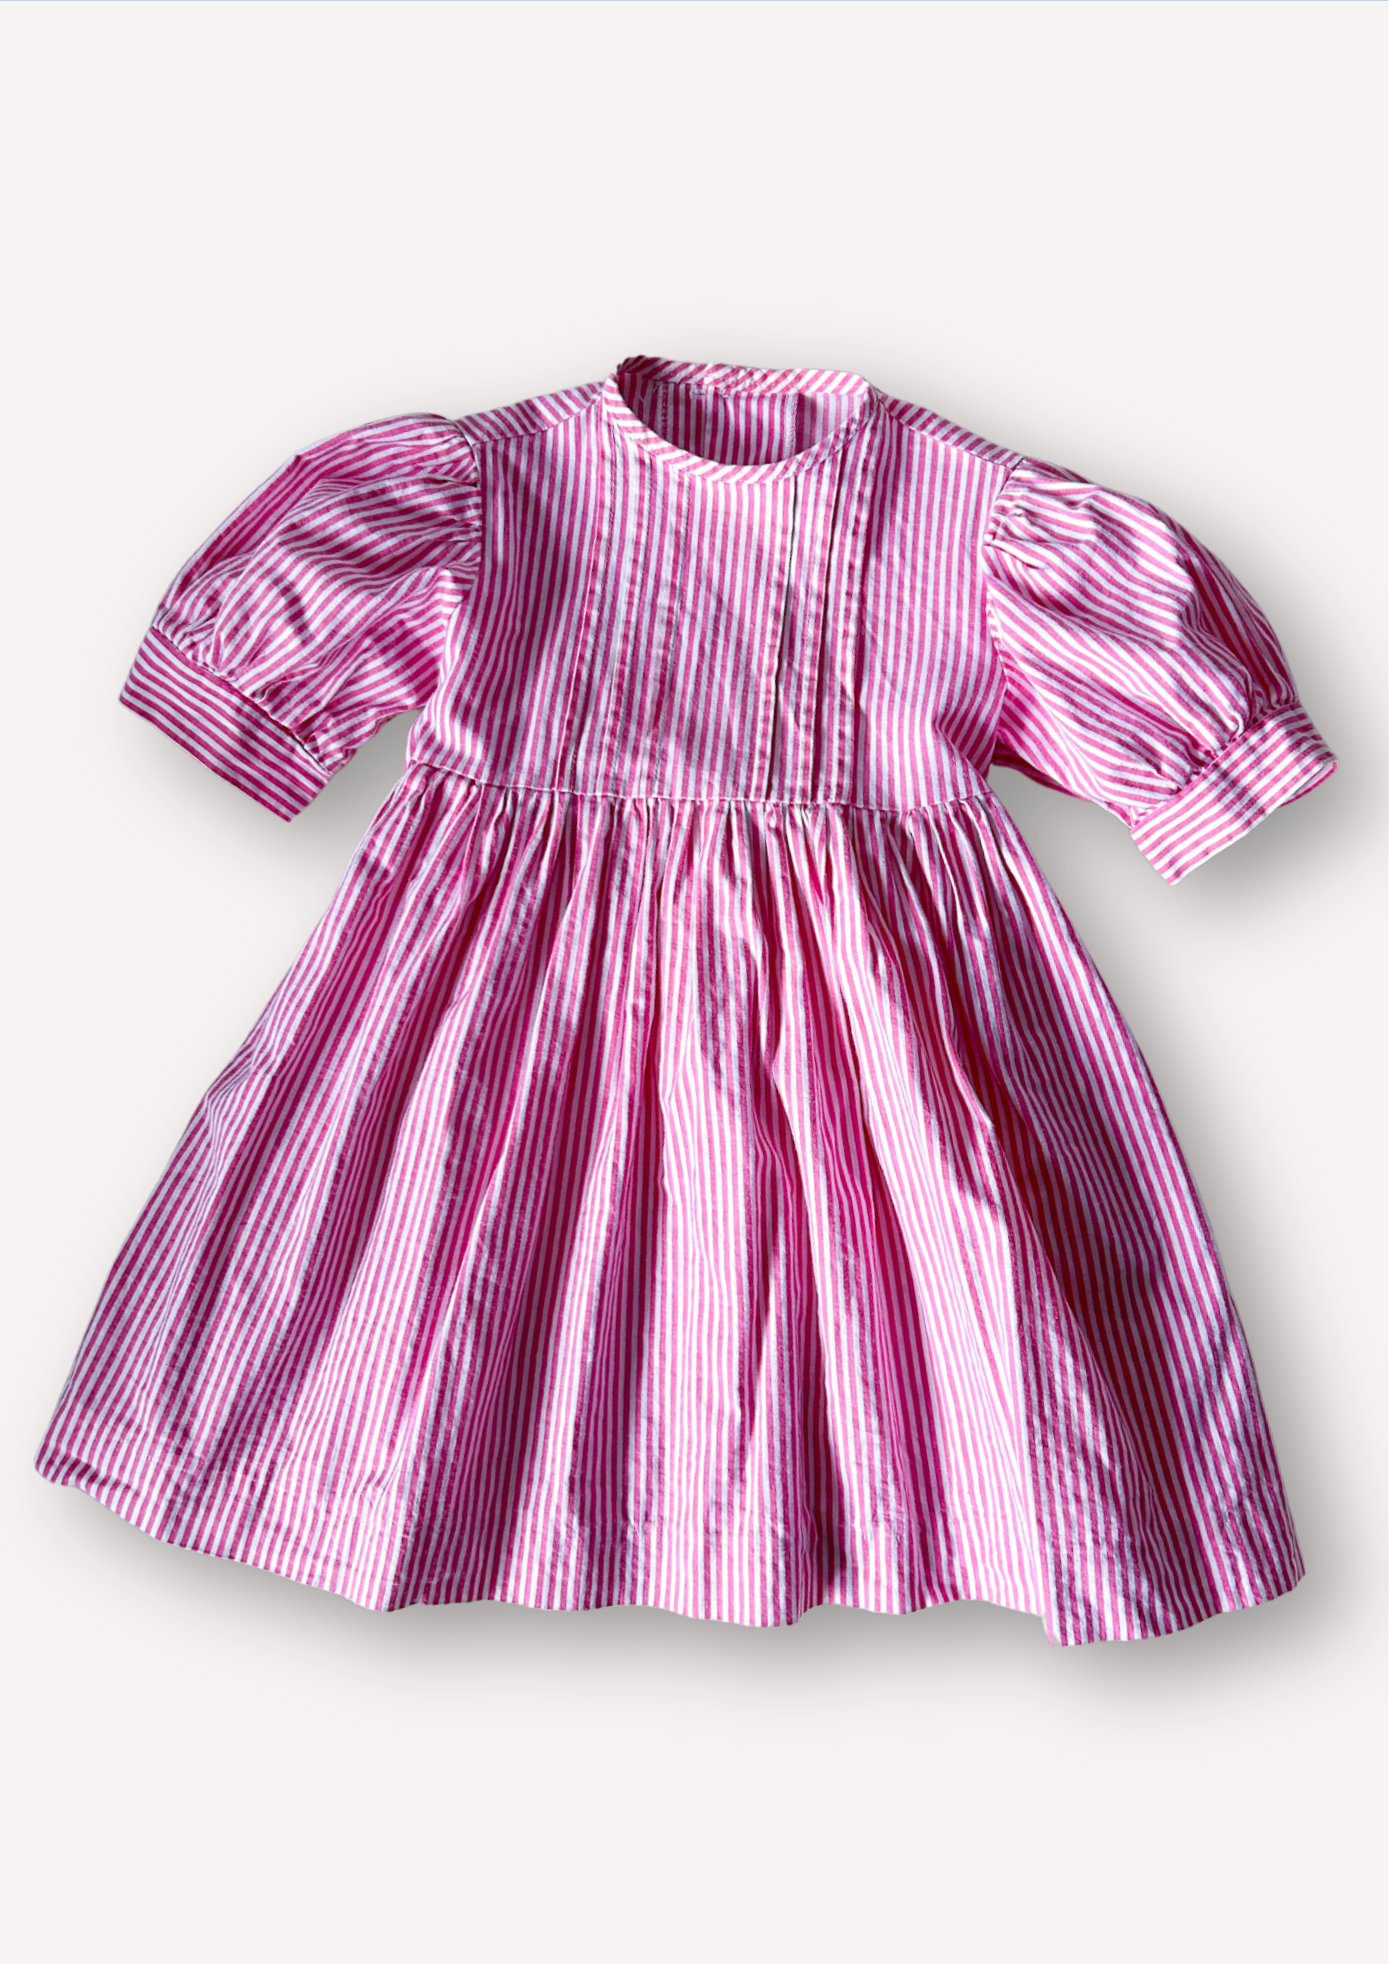 Vintage Handmade Candy Stripe Dress, approx 2-3 years